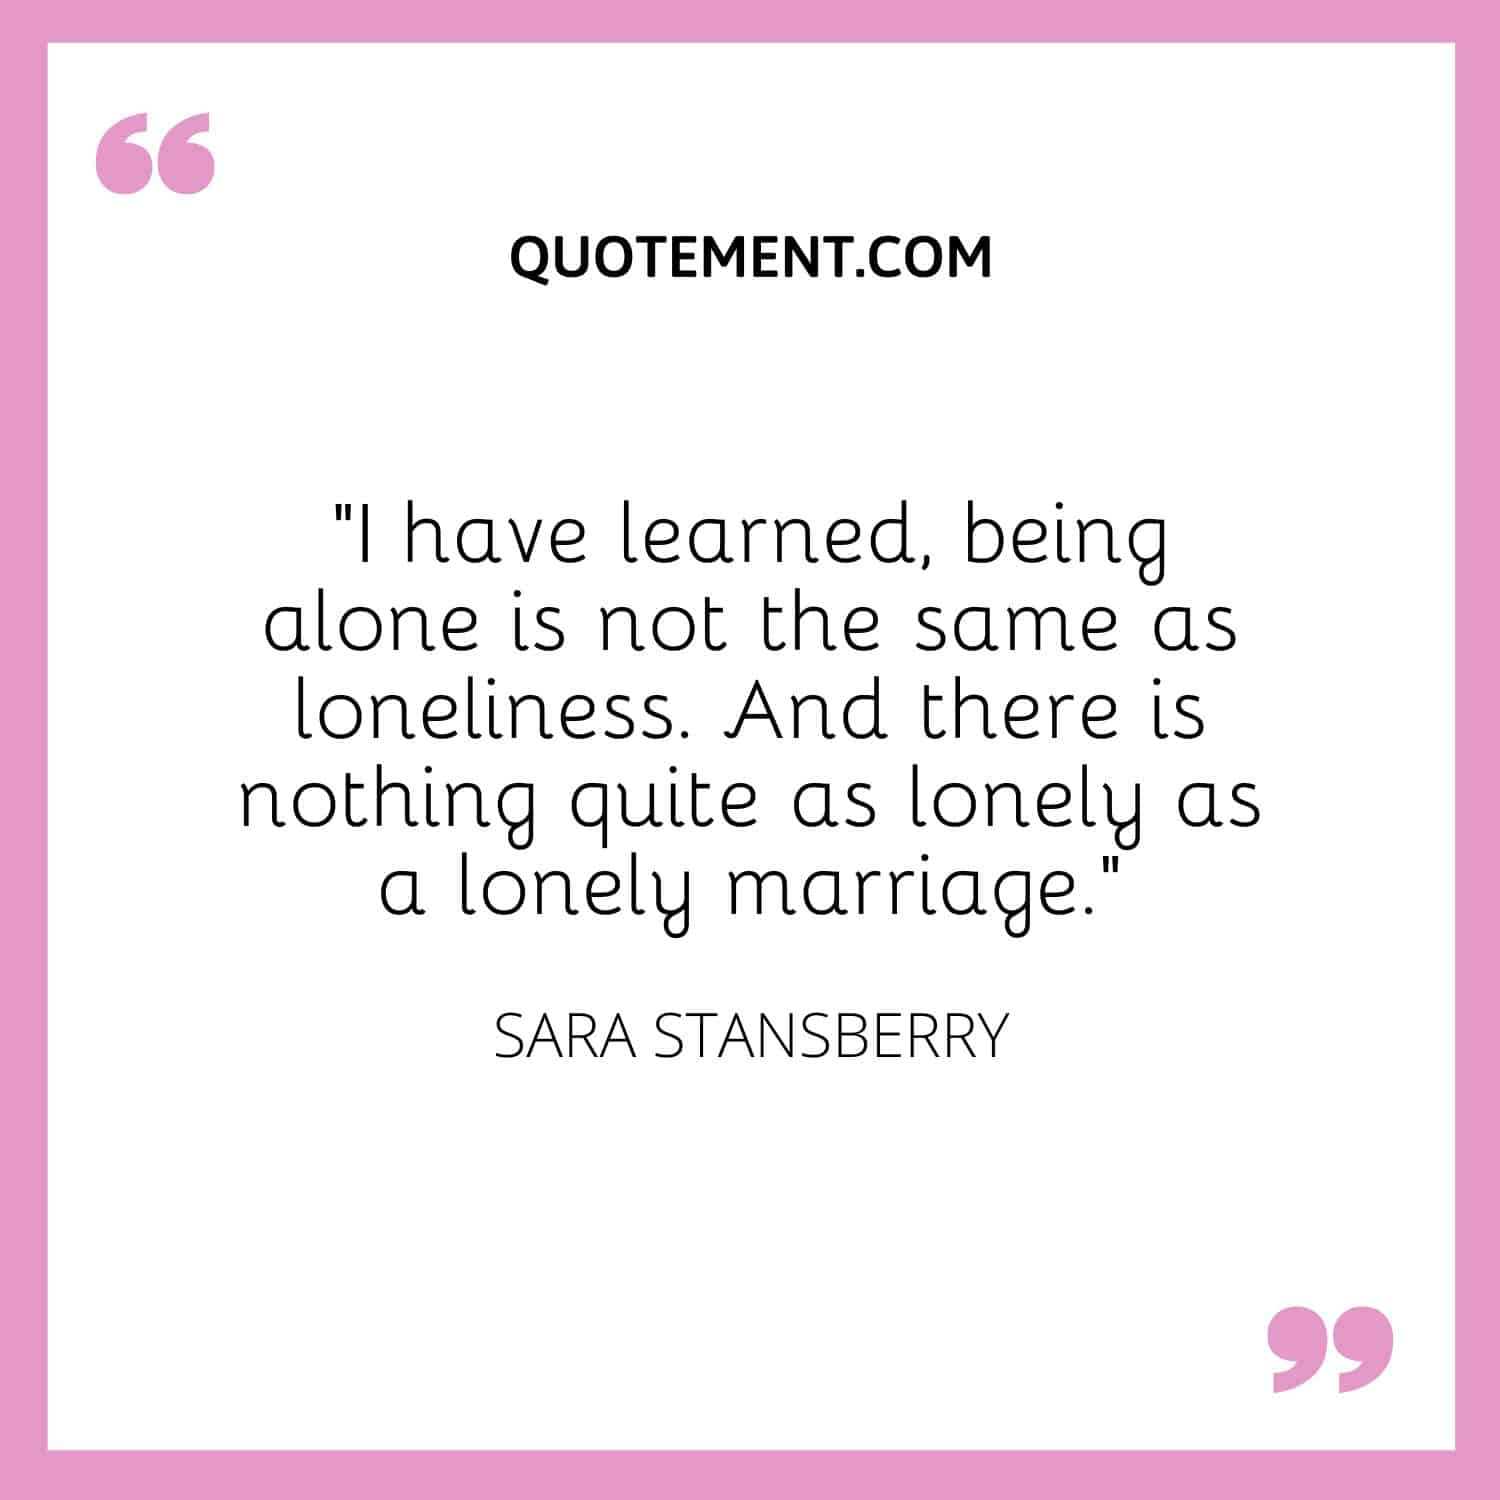 I have learned, being alone is not the same as loneliness.